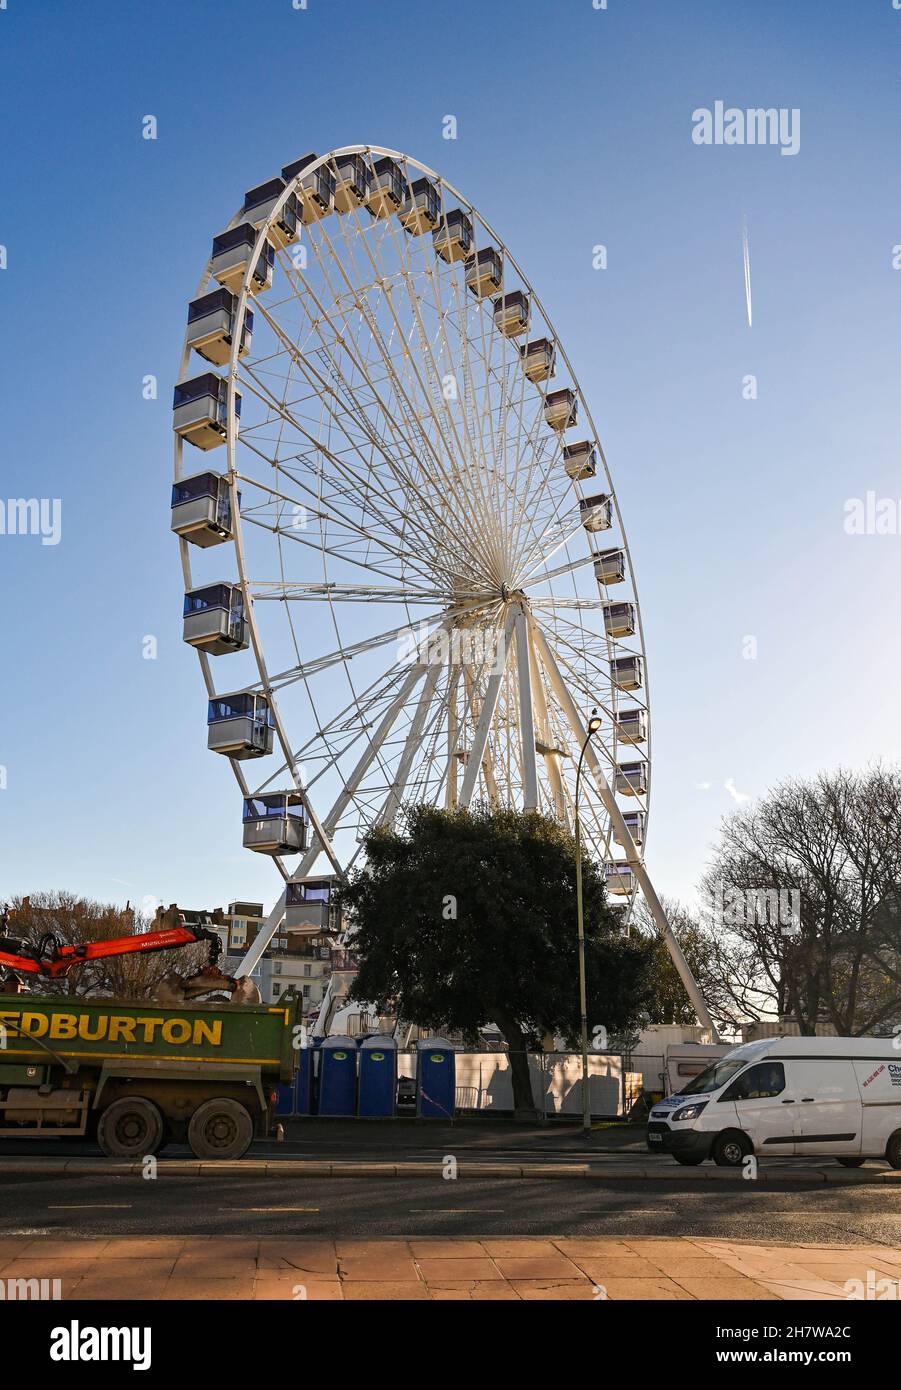 Brighton UK 25th November 2021 - A giant ferris wheel has been erected in the Old Steine Brighton which is to be part of the Brighton Christmas Festival this year : Credit Simon Dack / Alamy Live News Stock Photo